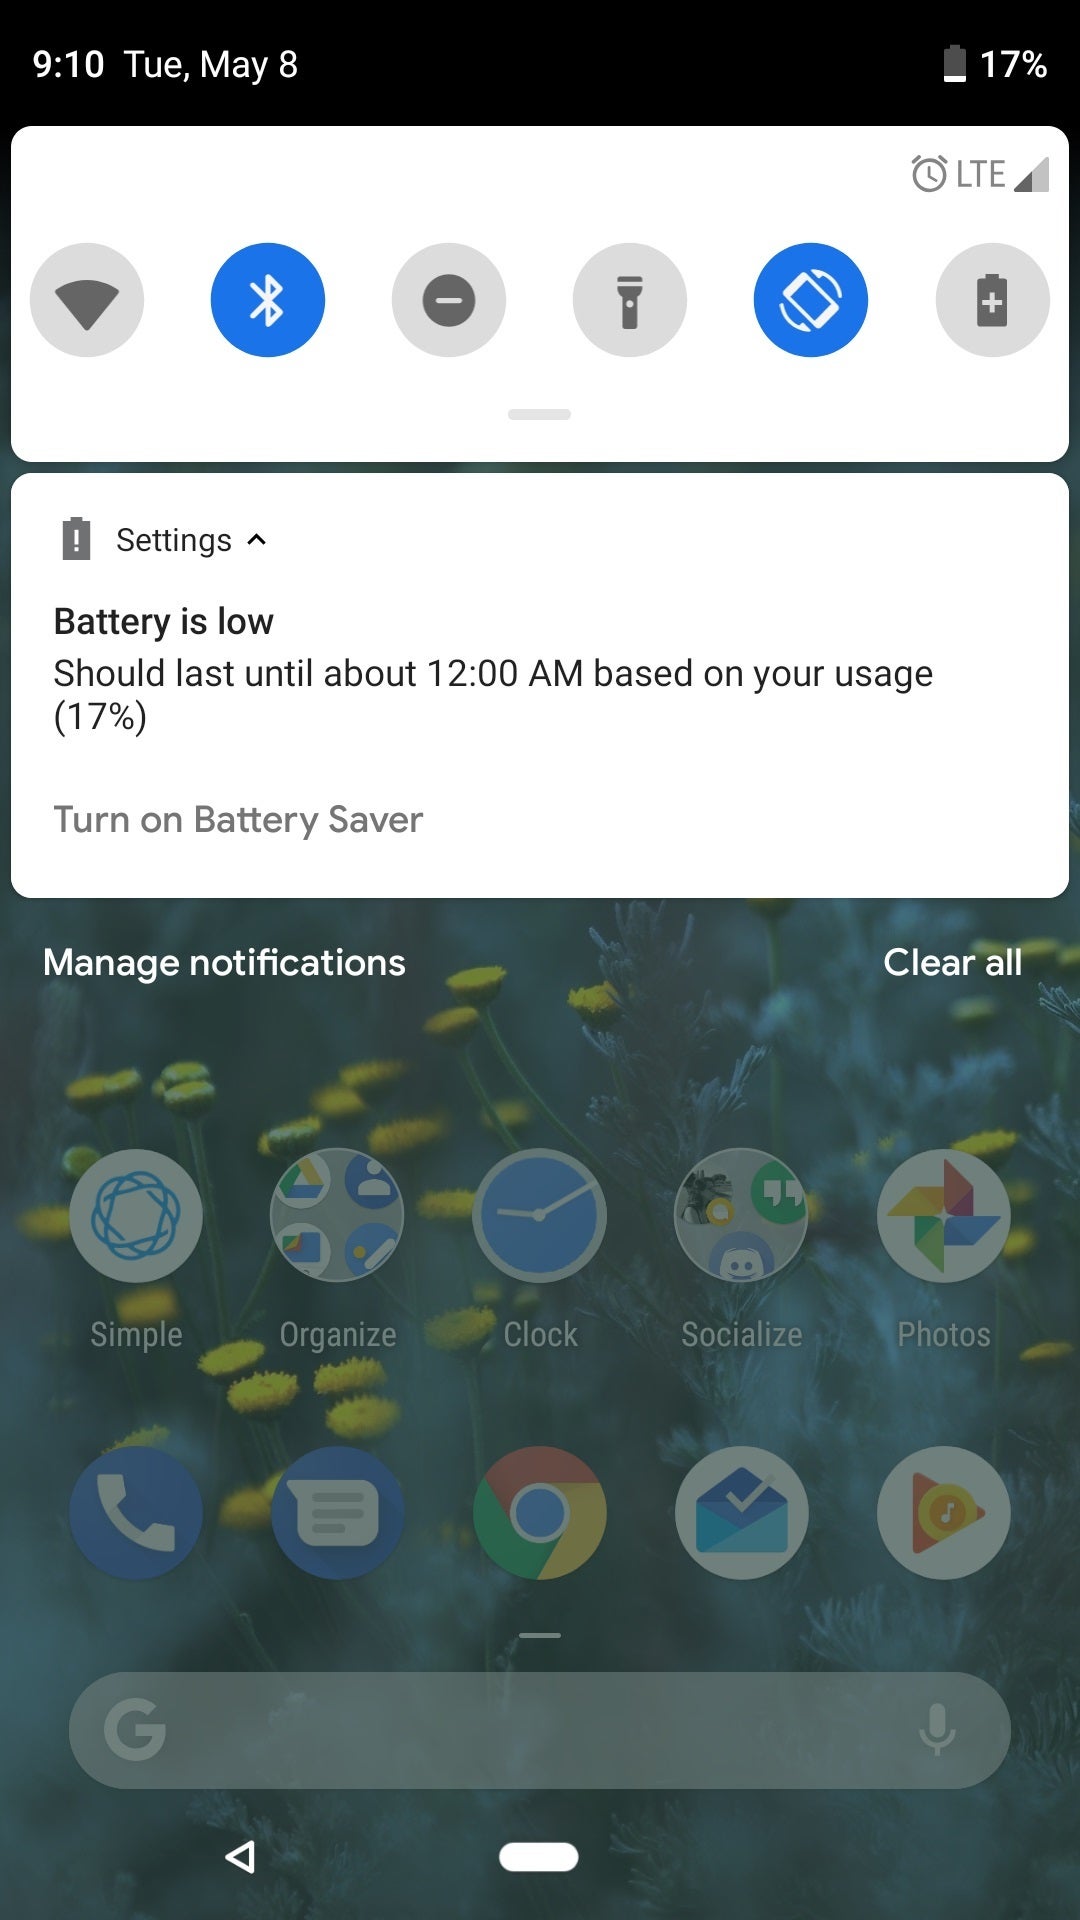 Which company has the most polite battery popup message? (Apple is blunt!)